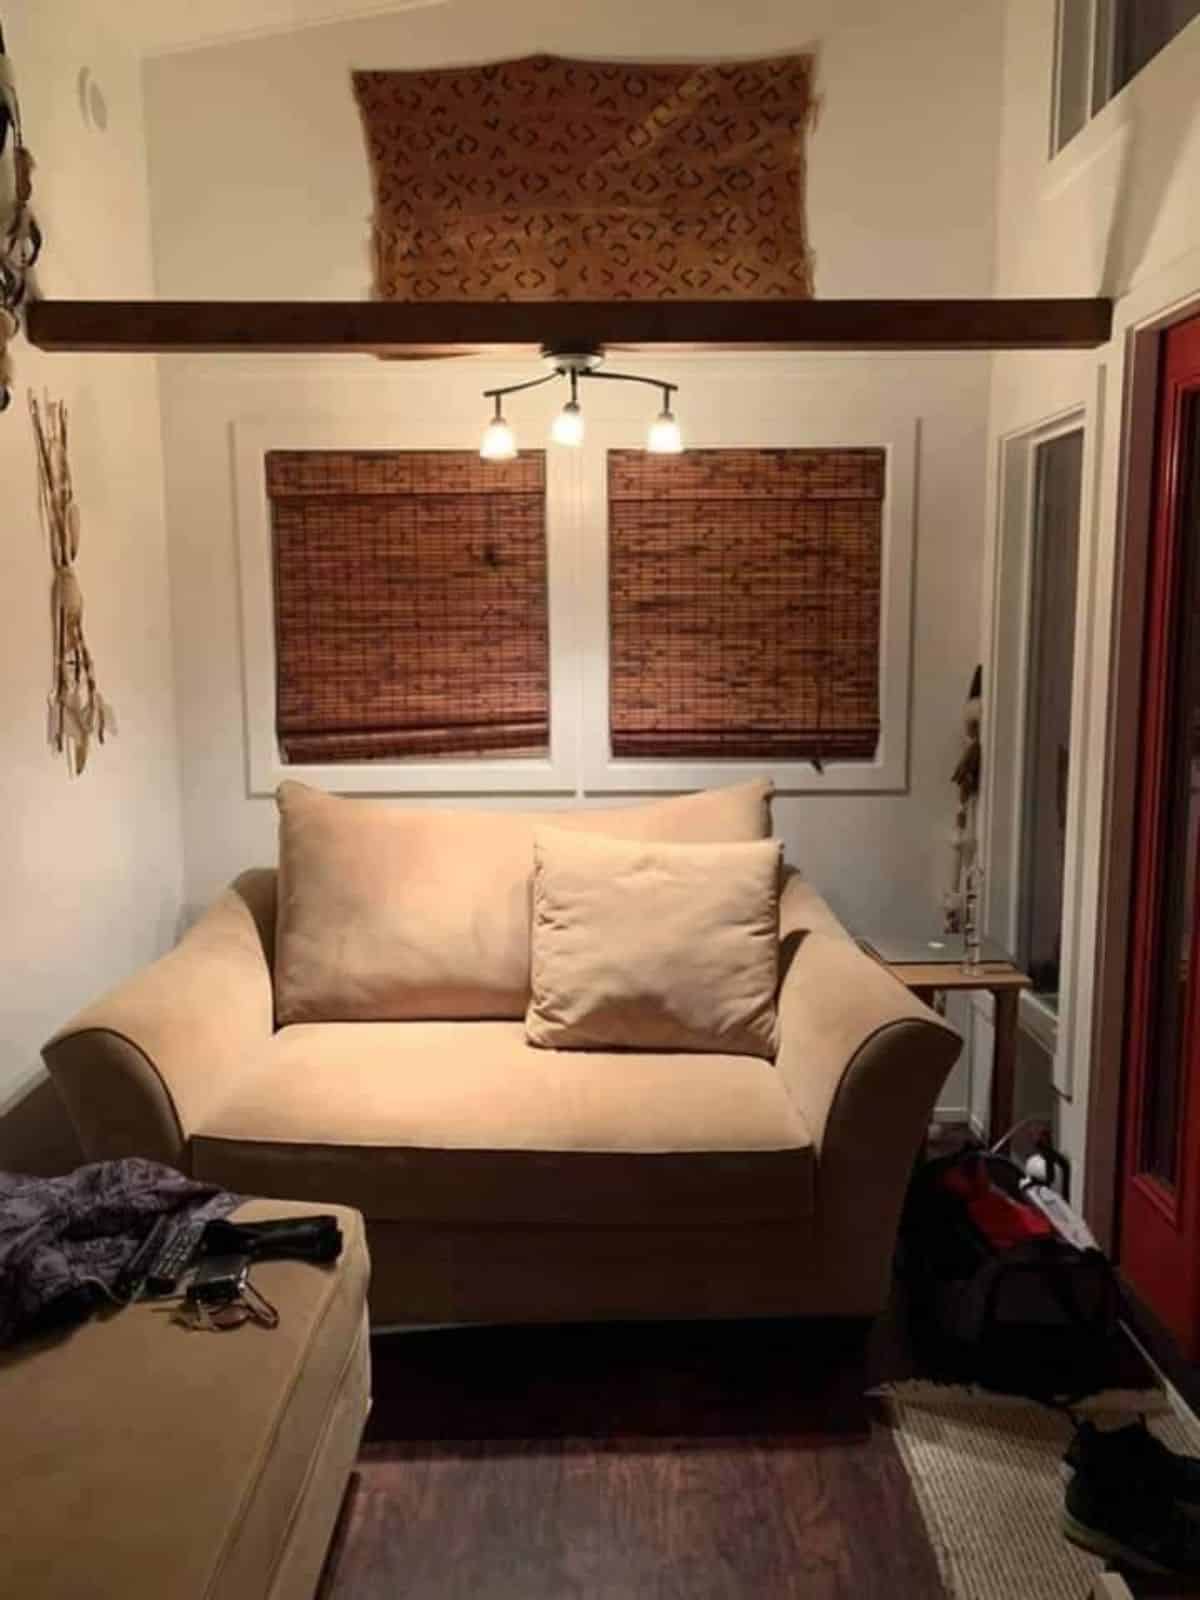 living area has a couch and has another loft above it